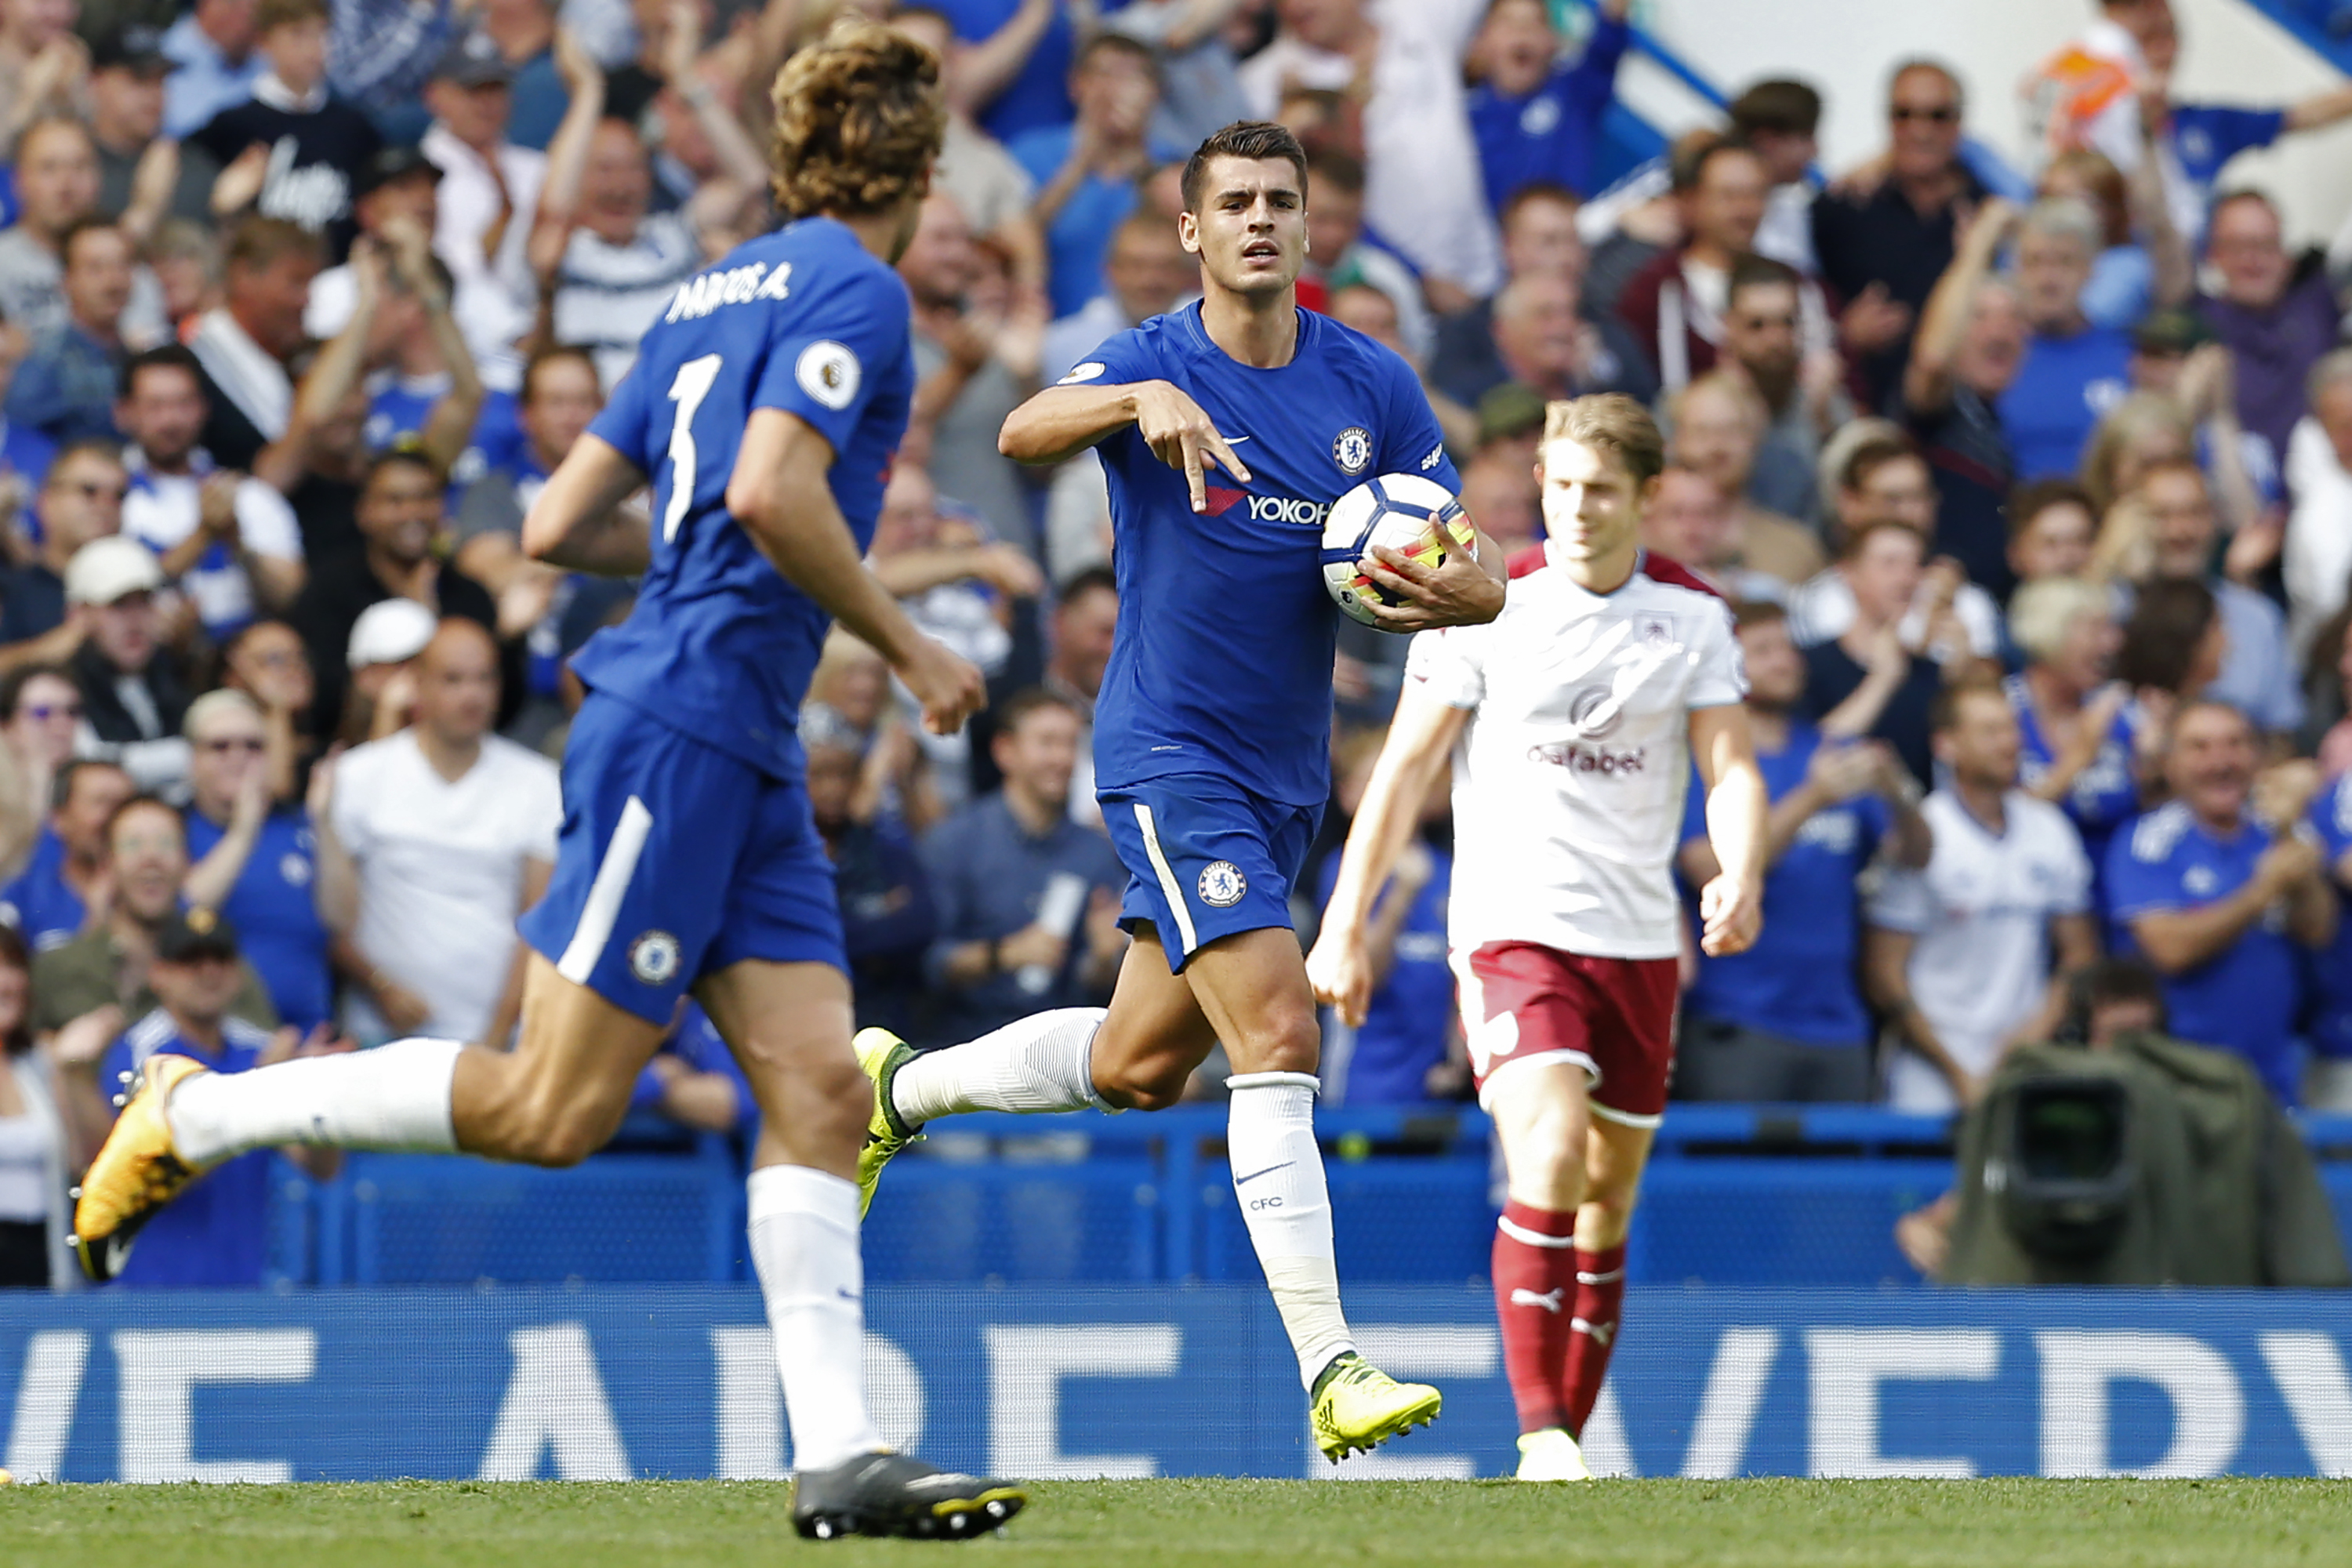 Chelsea's Spanish striker Alvaro Morata (C) celebrates scoring his first Premier League goal during the English Premier League football match between Chelsea and Burnley at Stamford Bridge in London on August 12, 2017. / AFP PHOTO / Ian KINGTON / RESTRICTED TO EDITORIAL USE. No use with unauthorized audio, video, data, fixture lists, club/league logos or 'live' services. Online in-match use limited to 75 images, no video emulation. No use in betting, games or single club/league/player publications.  /         (Photo credit should read IAN KINGTON/AFP/Getty Images)